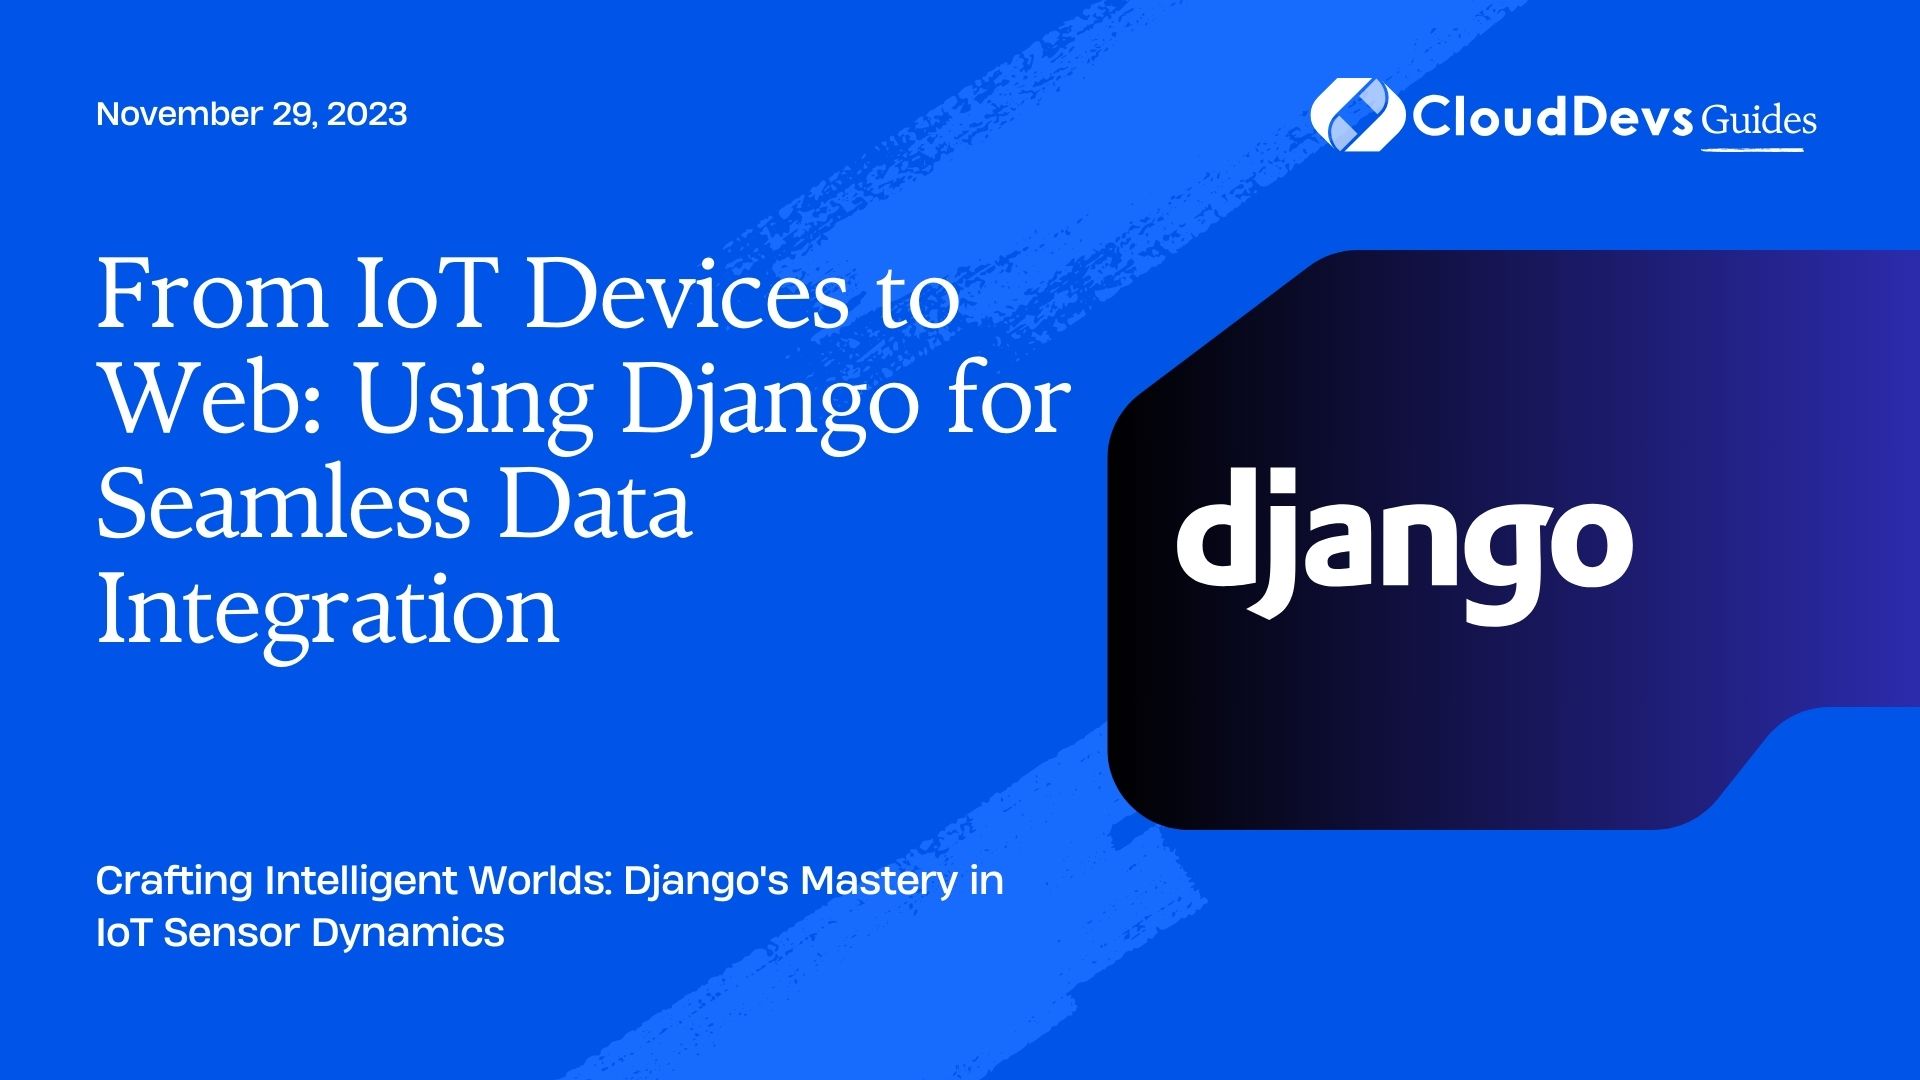 From IoT Devices to Web: Using Django for Seamless Data Integration